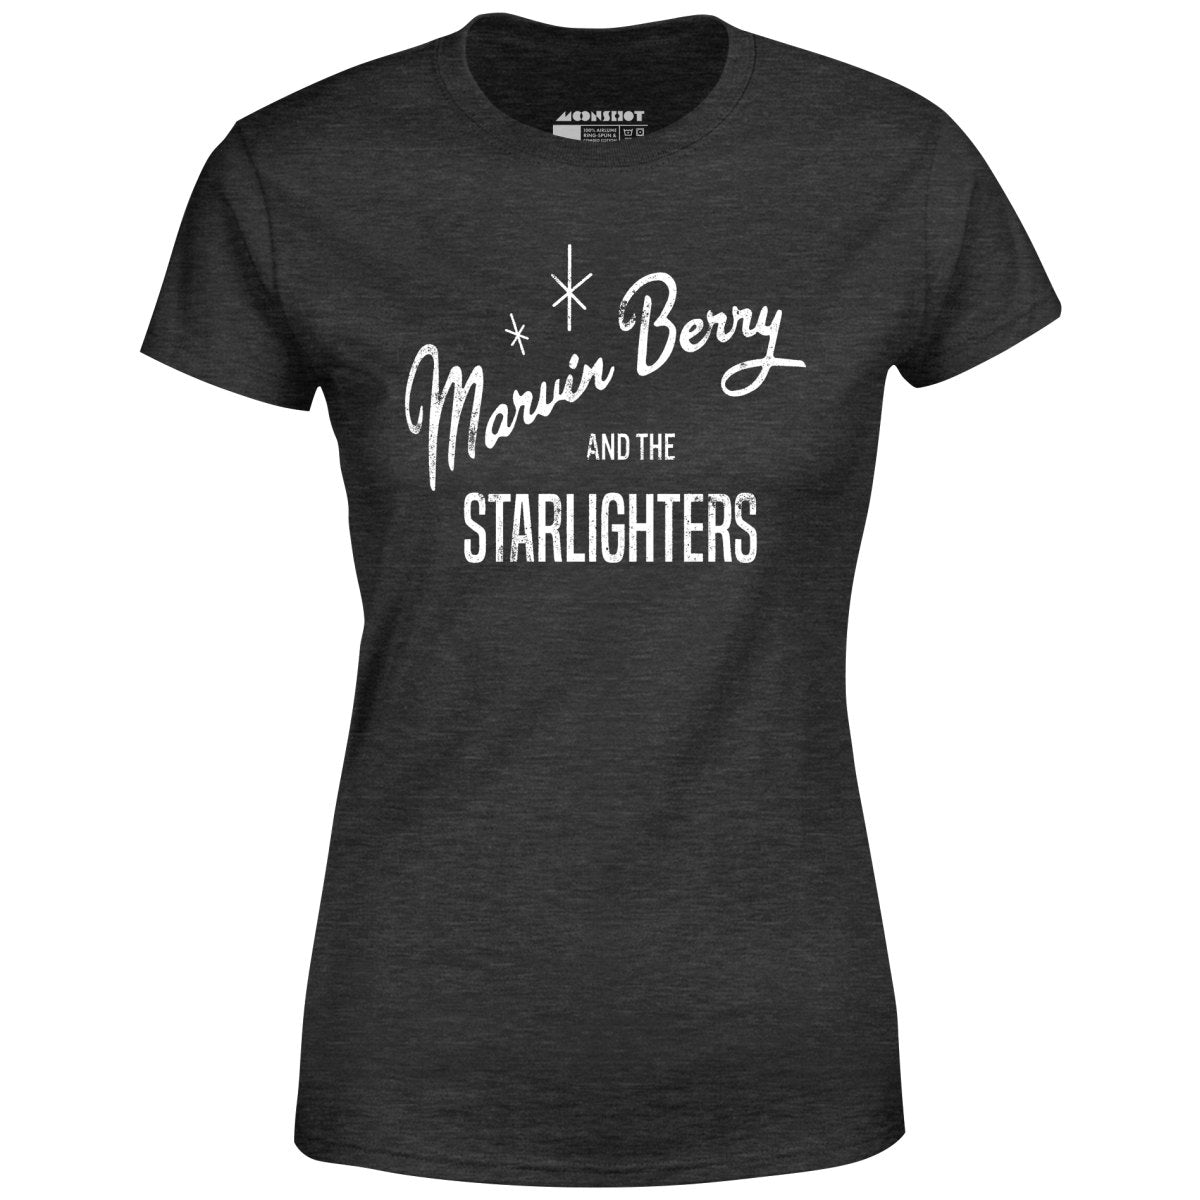 Marvin Berry and The Starlighters - Women's T-Shirt